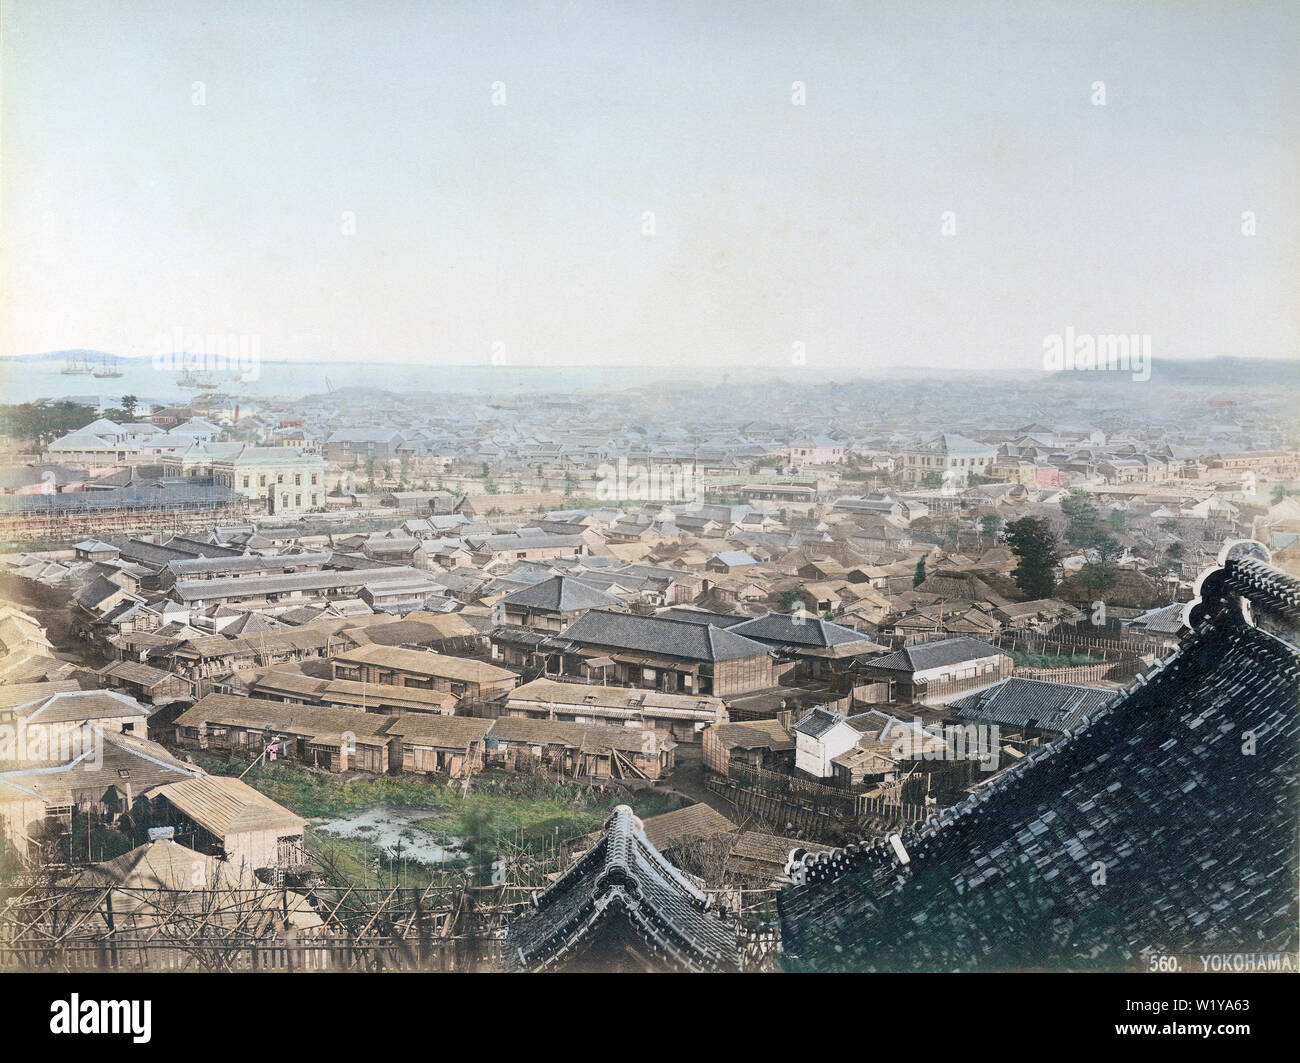 [ 1880s Japan - View of Yokohama ] —   Panoramic view of Yokohama sometime around 1881 (Meiji 14) as seen from Narita-san Enmei-in Temple (成田山横浜別院、延命院). The light colored building in the left background is Yokohama Station, opened in 1871 (Meiji 4). The Western-style buildings behind the station belong to the Raw Silk Aratame Company, later the Associated Raw Silk Warehouse (生糸改会杜、のち連合生糸荷預所). Yokohama Shiloh Church (横浜指路教会), built in 1892 (Meiji 25), has not yet been built.  19th century vintage albumen photograph. Stock Photo